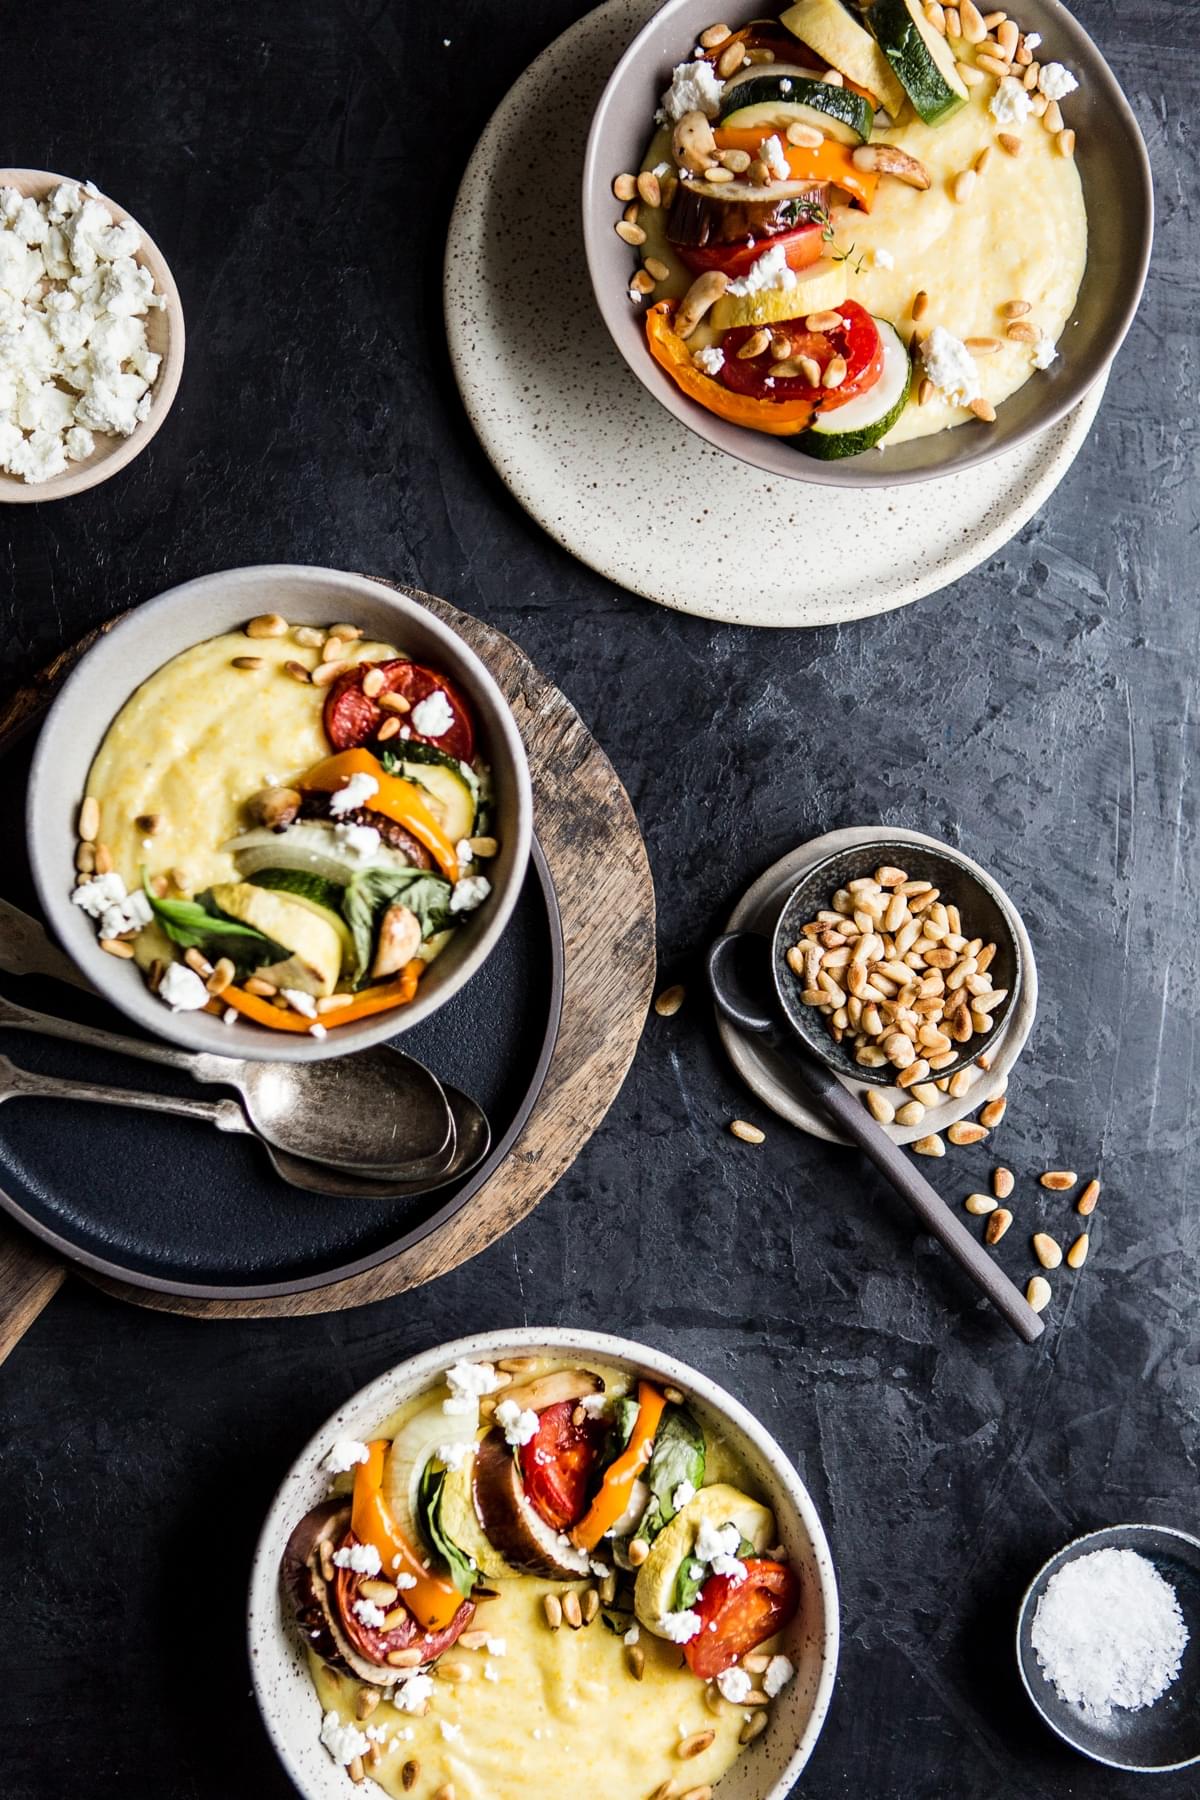 Creamy Goat Cheese Polenta With Ratatouille toasted pine nuts and basil